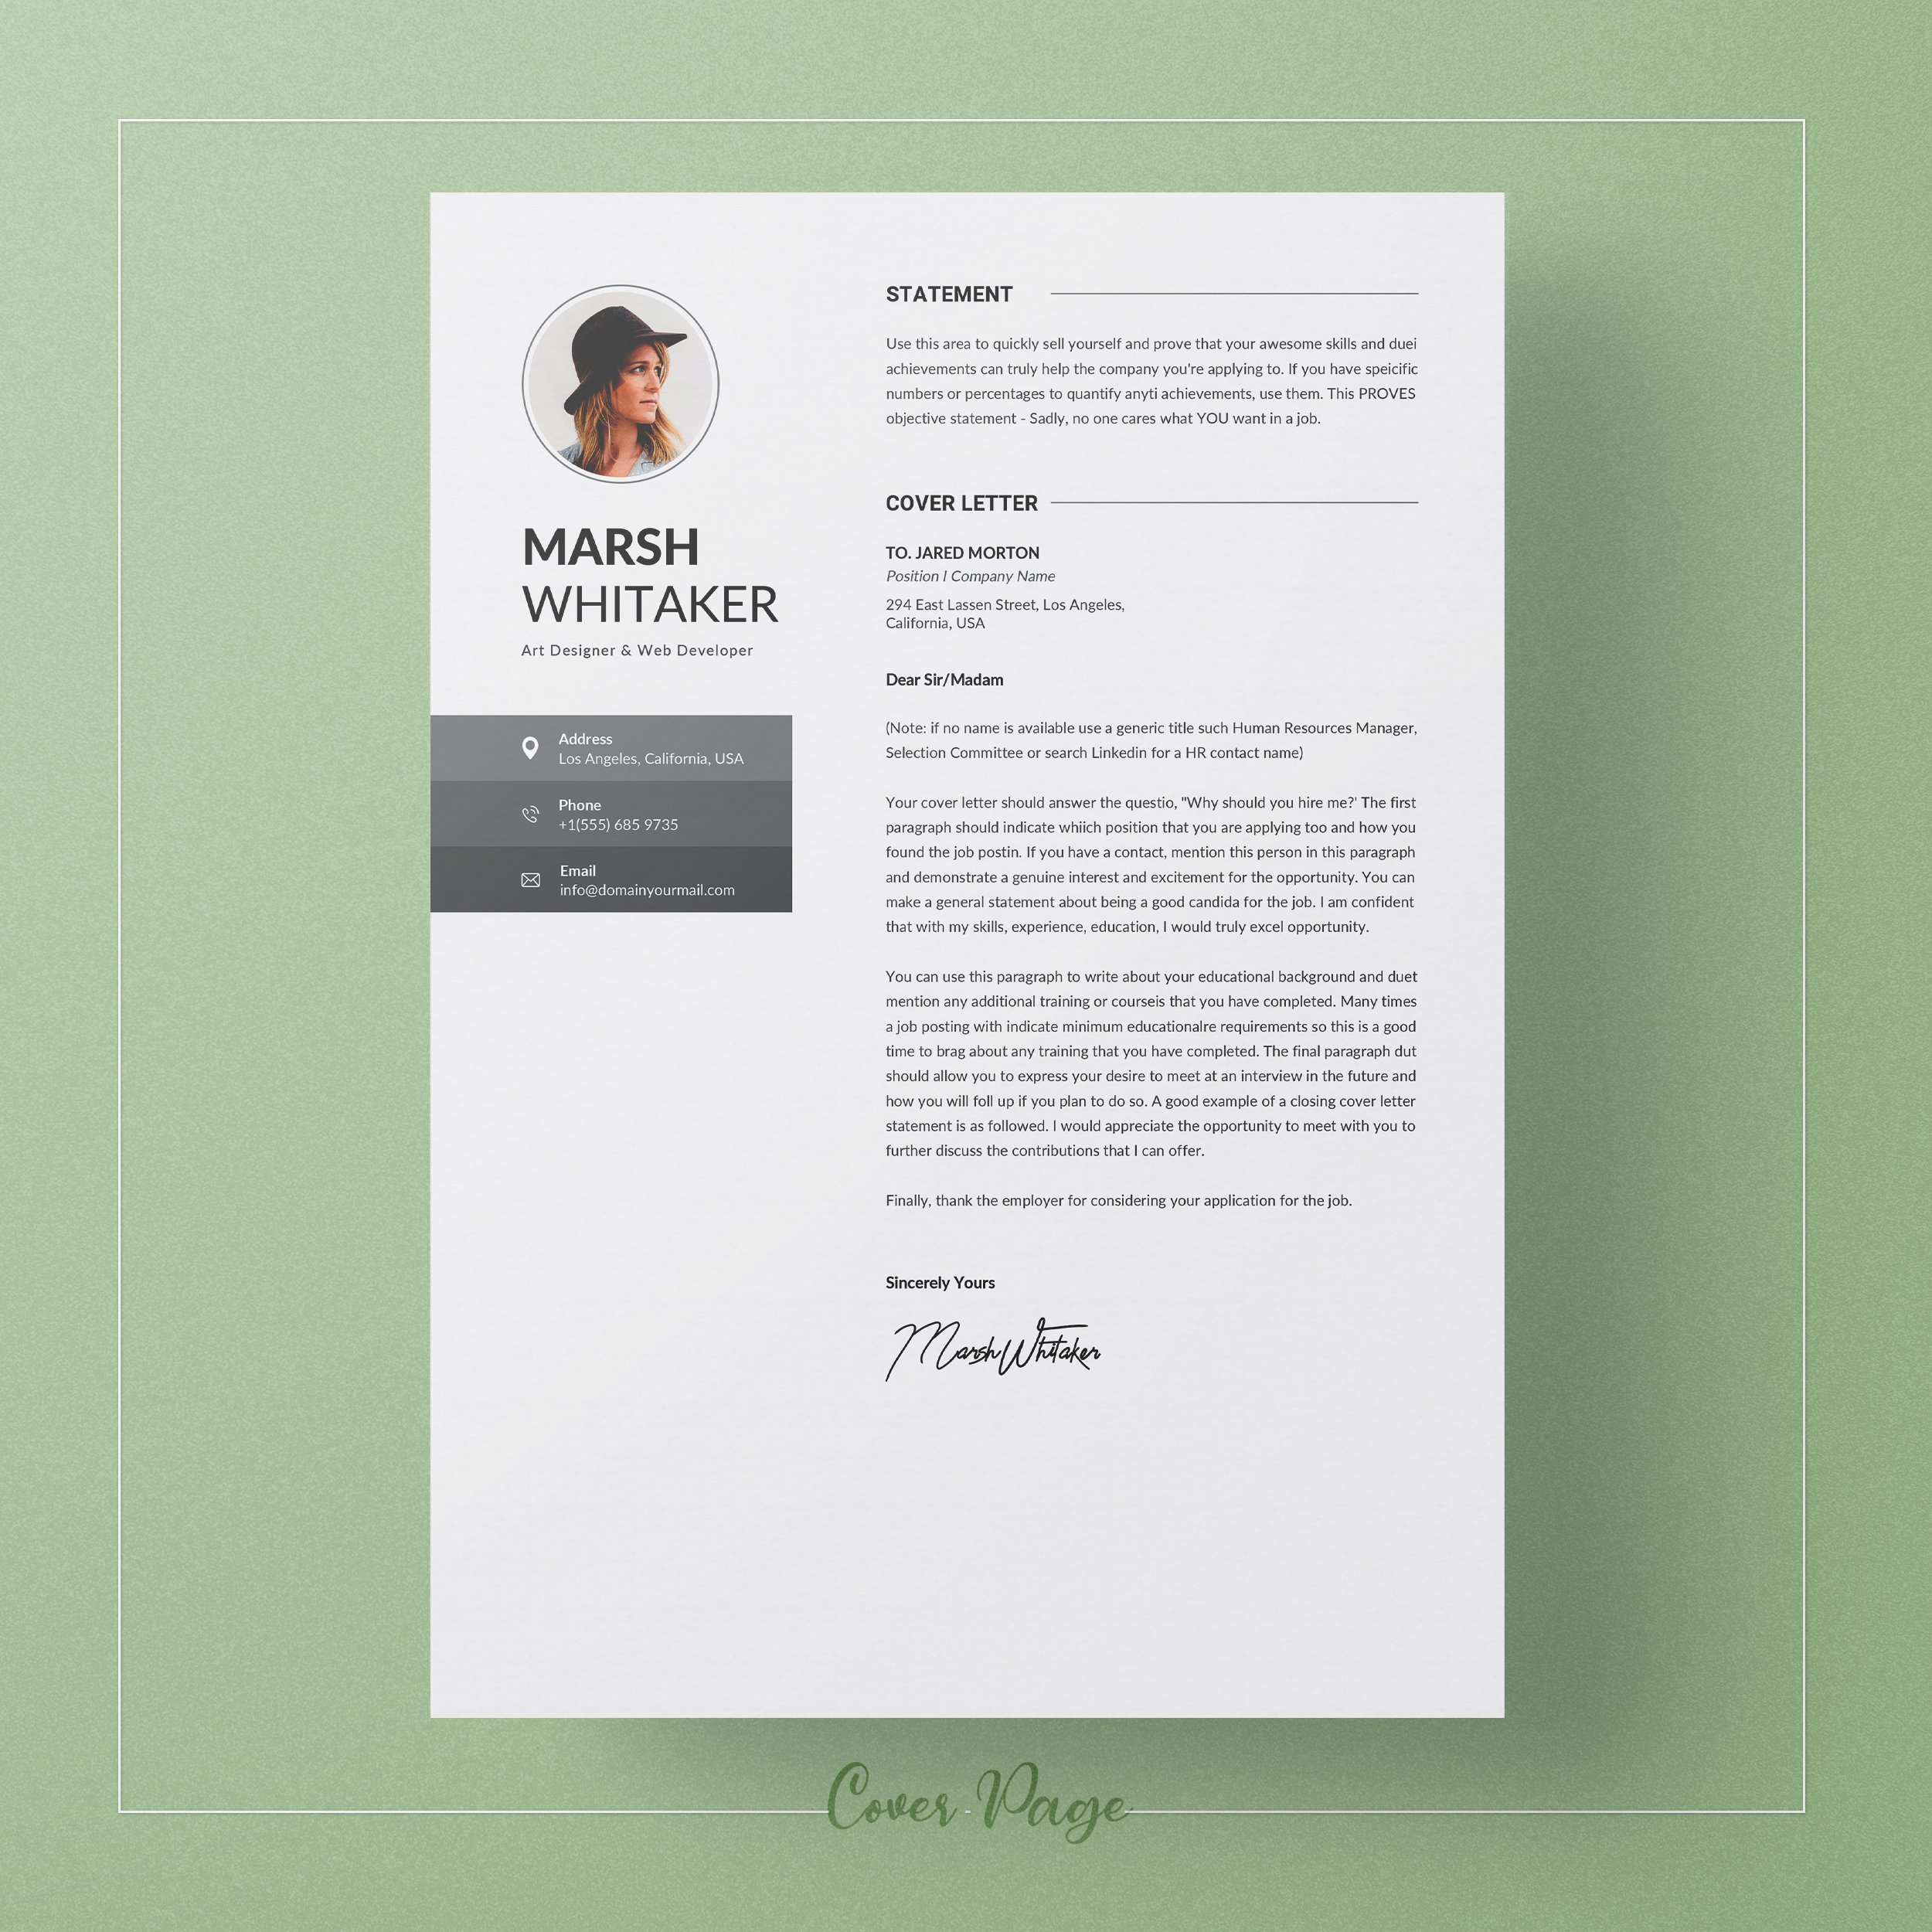 Professional resume template with a green background.